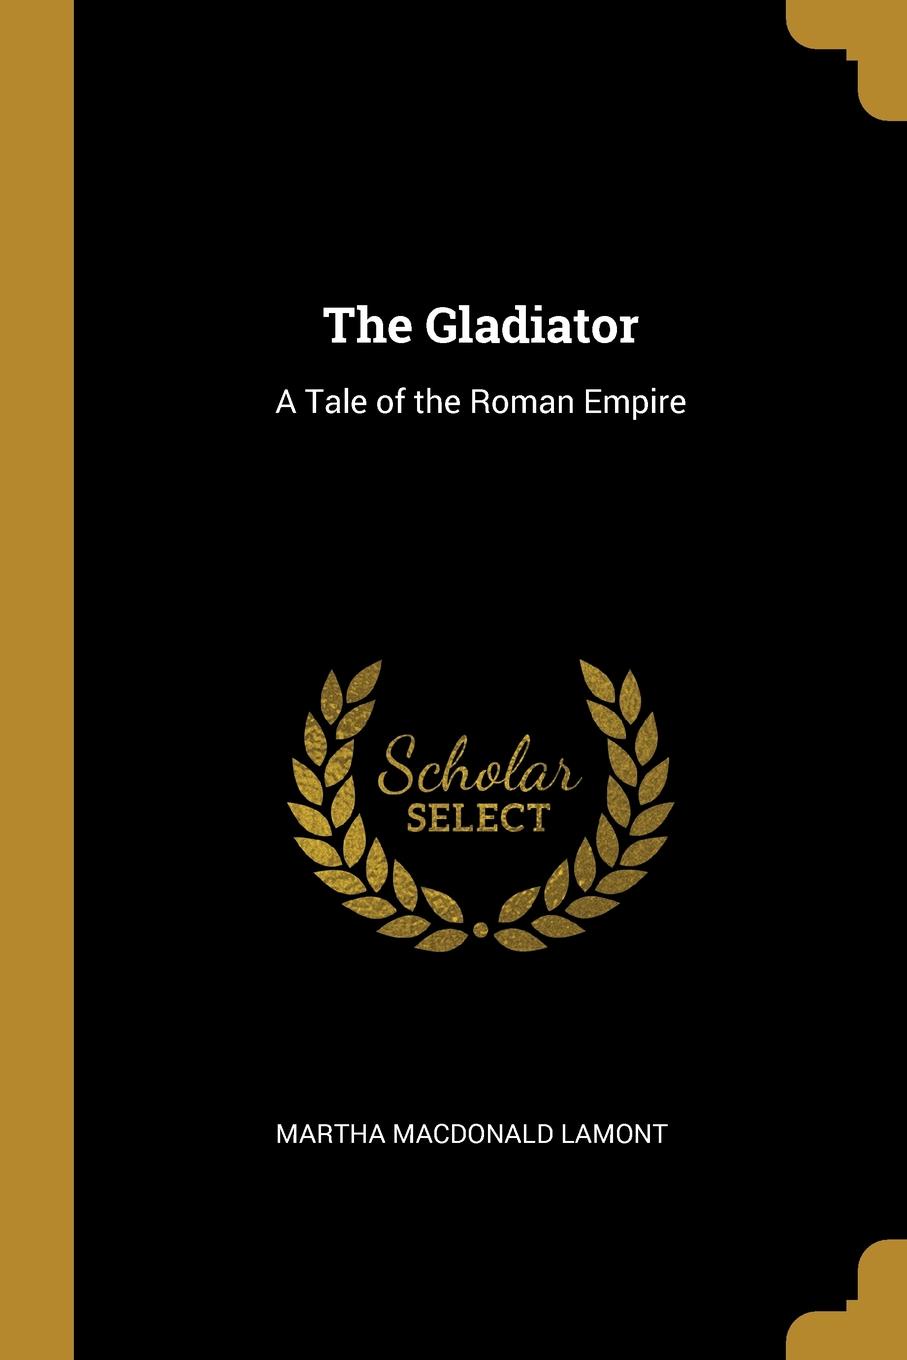 The Gladiator. A Tale of the Roman Empire